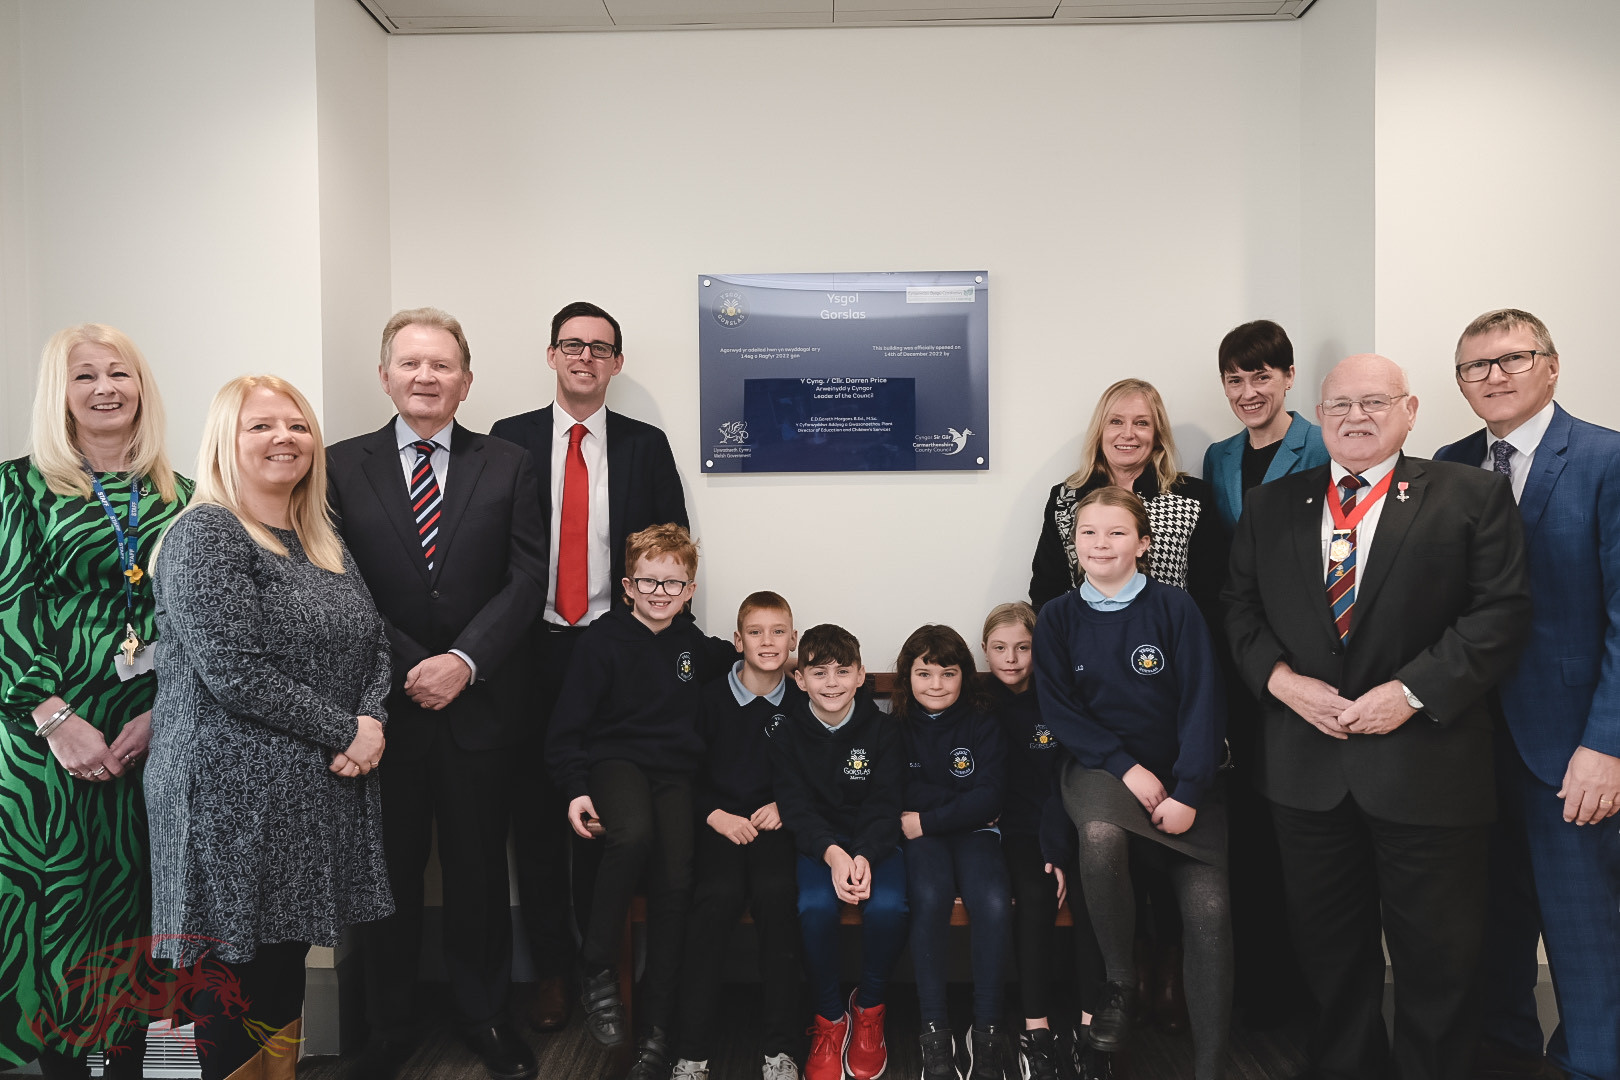 Ysgol Gorslas’ new building officially opened